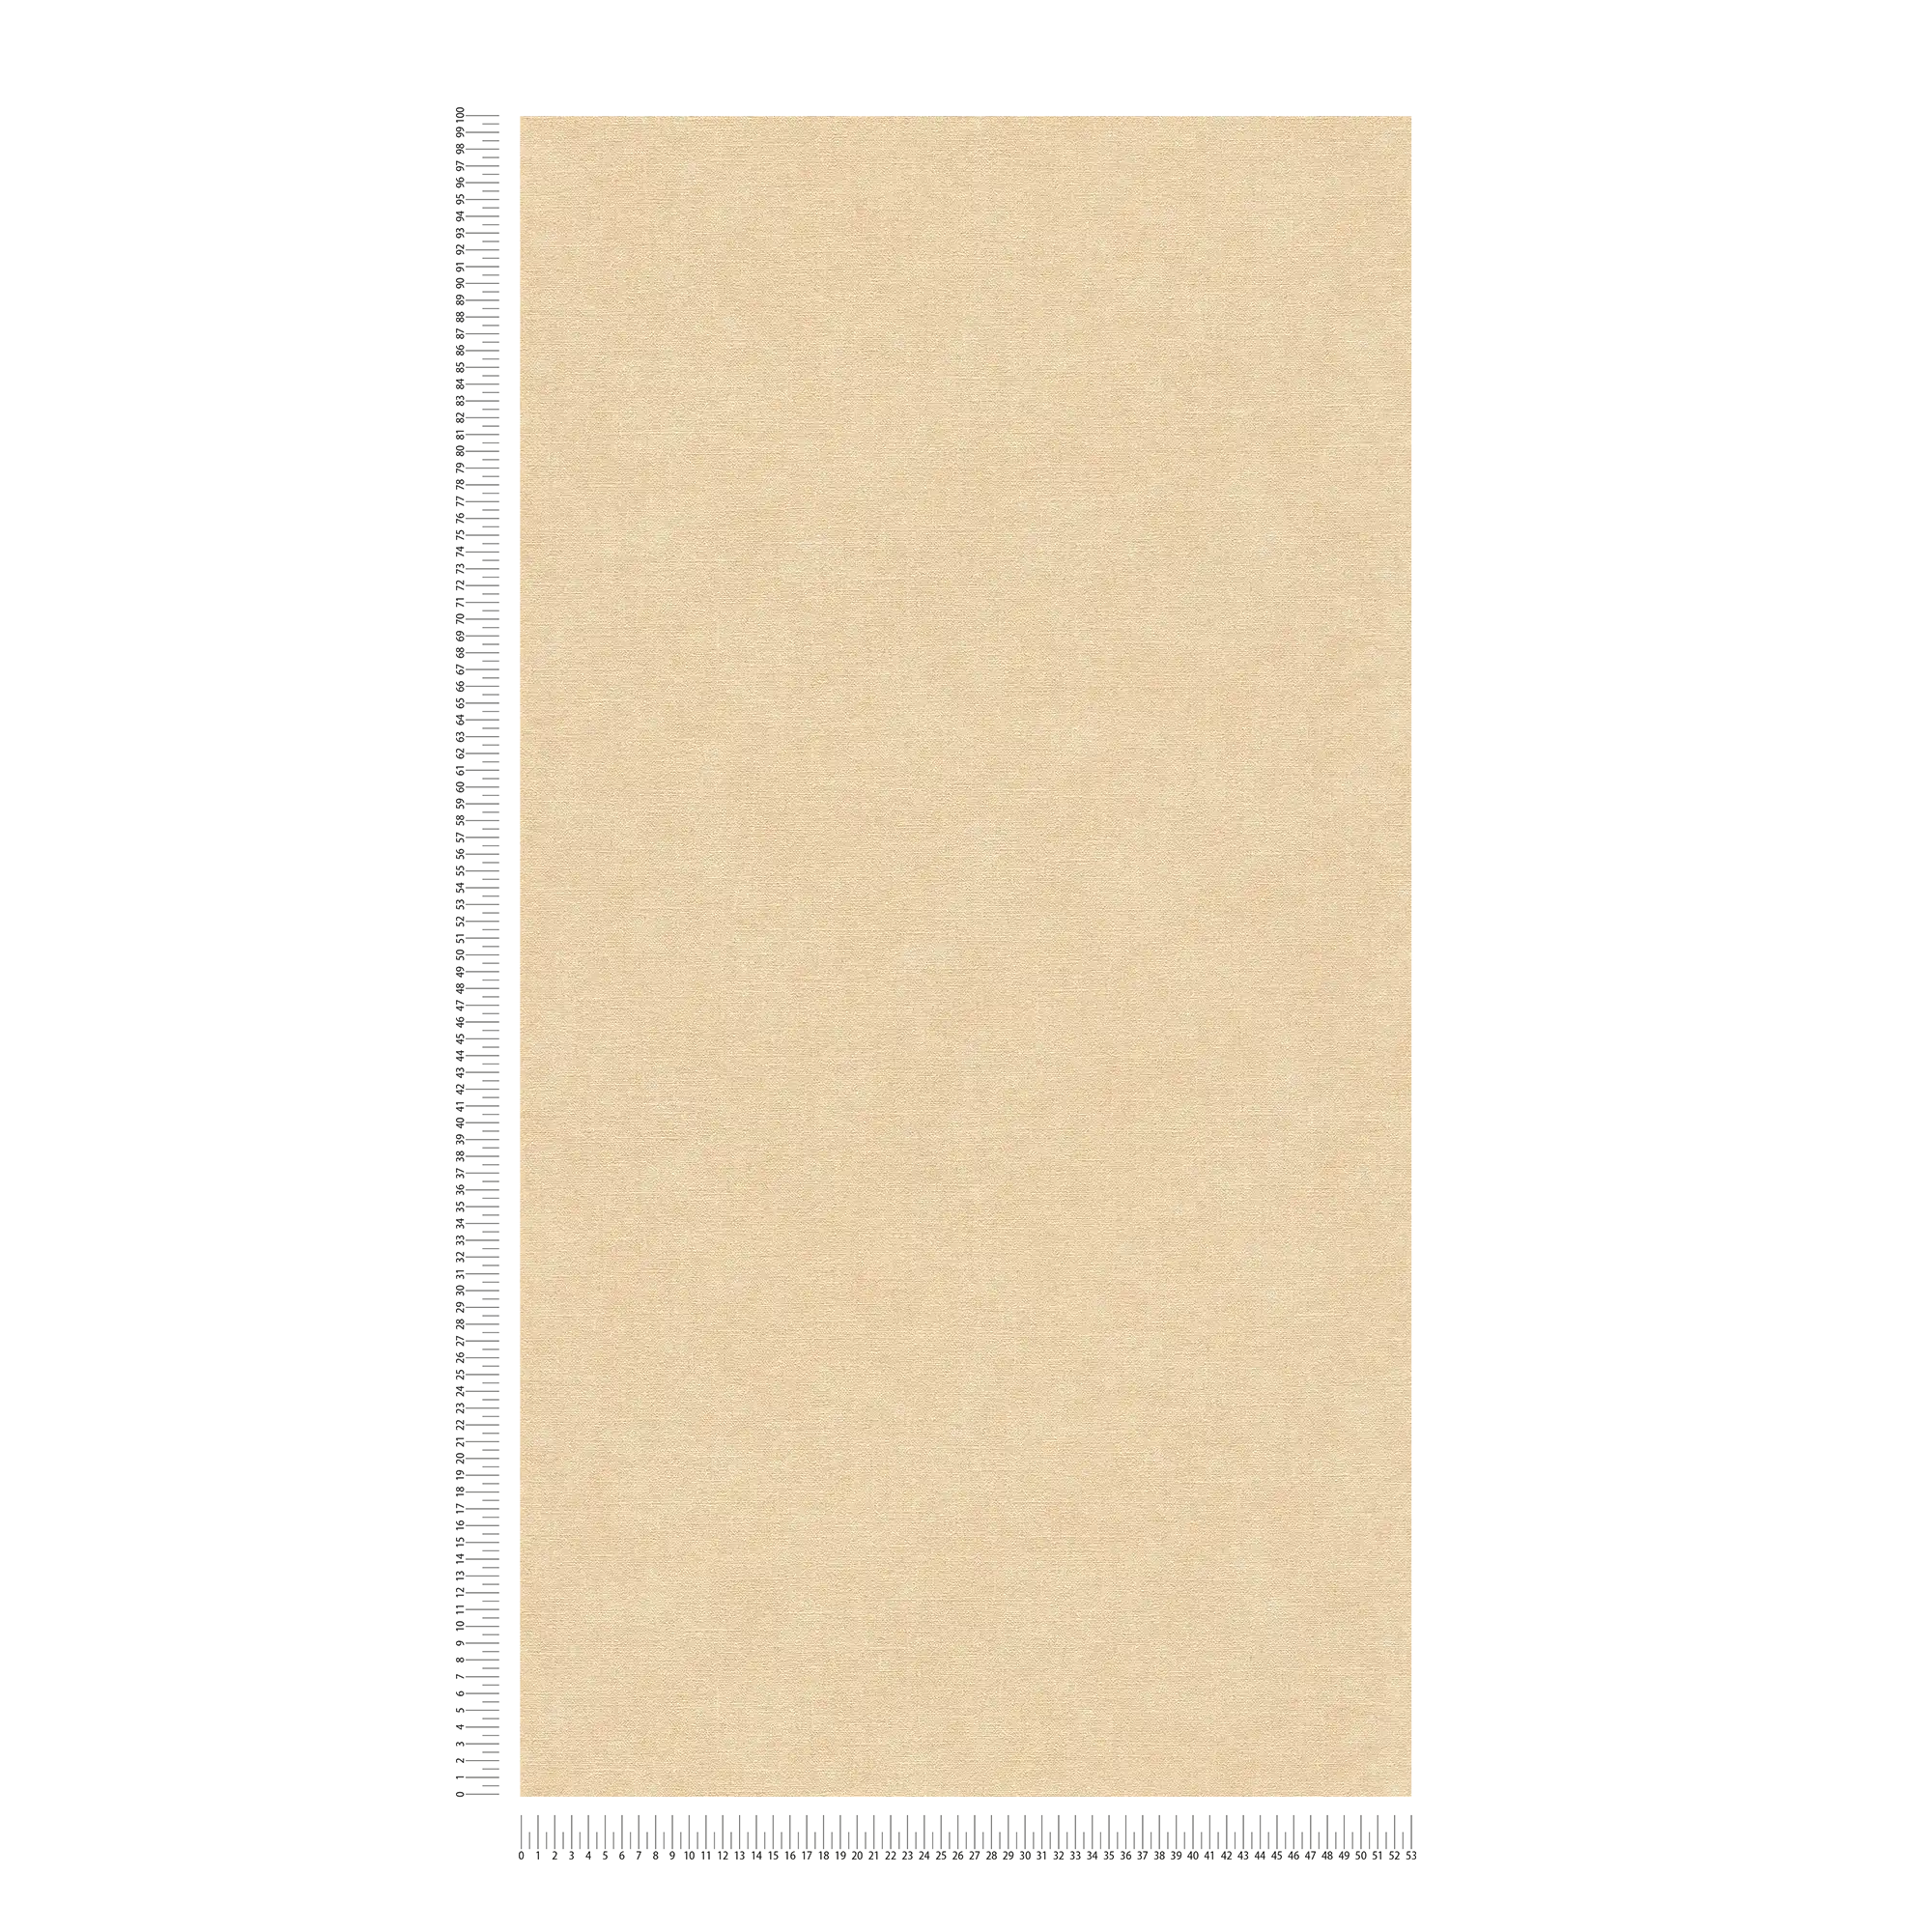             Single-coloured non-woven wallpaper in textile look - beige, brown
        